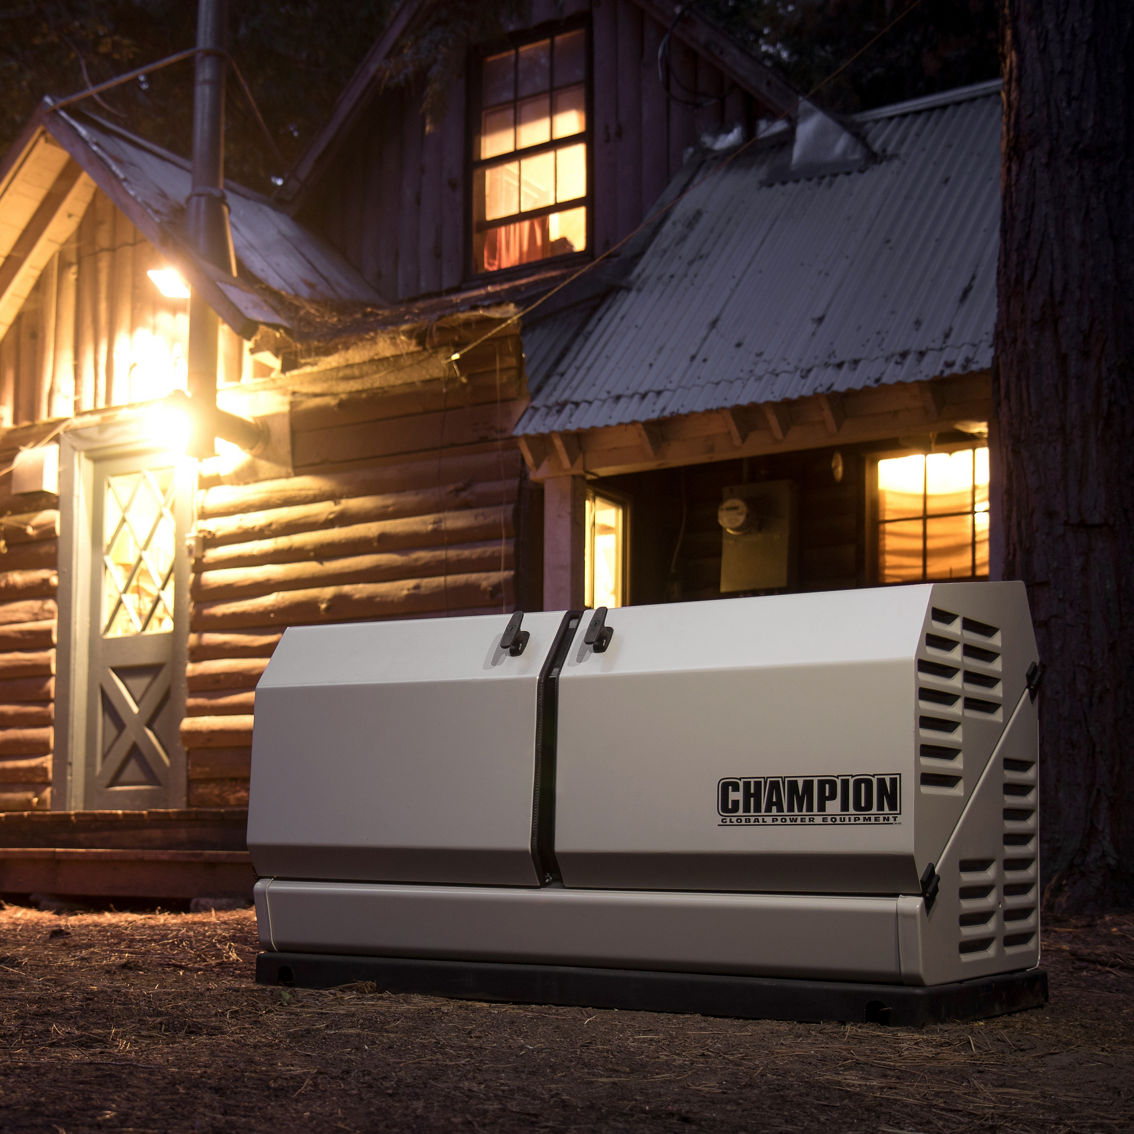 Champion 14kW aXis Home Standby Generator System with 150-Amp Auto Transfer Switch - Image 6 of 8